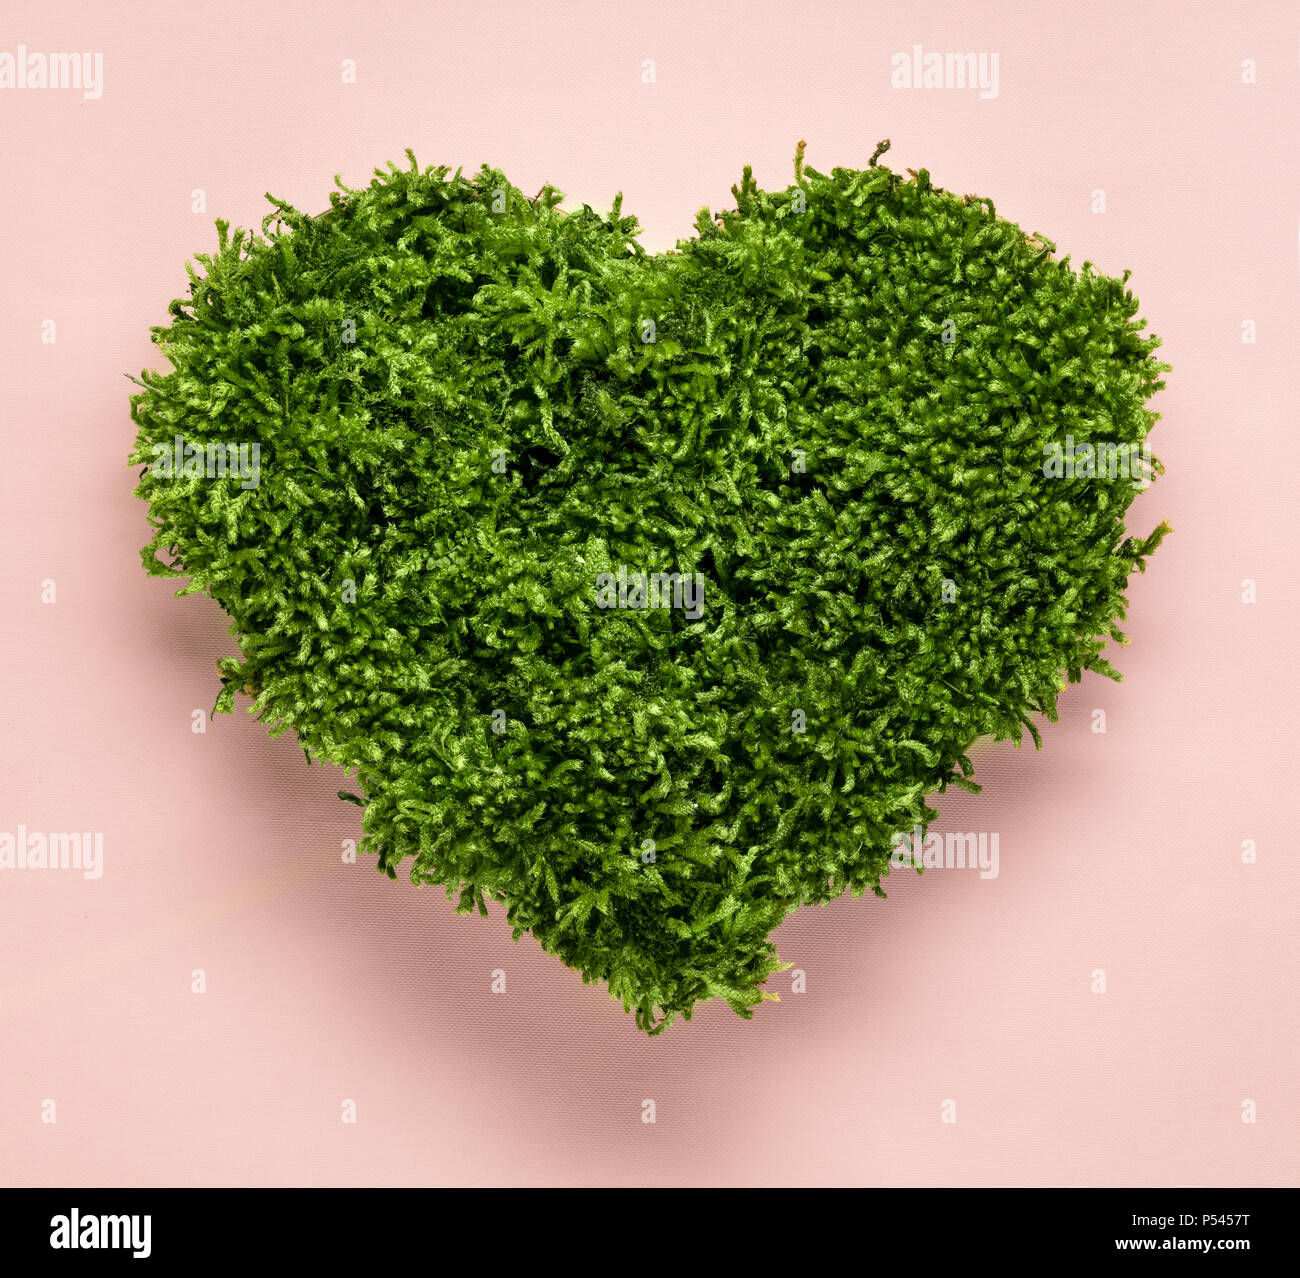 Green moss heart shape on pink background Stock Photo